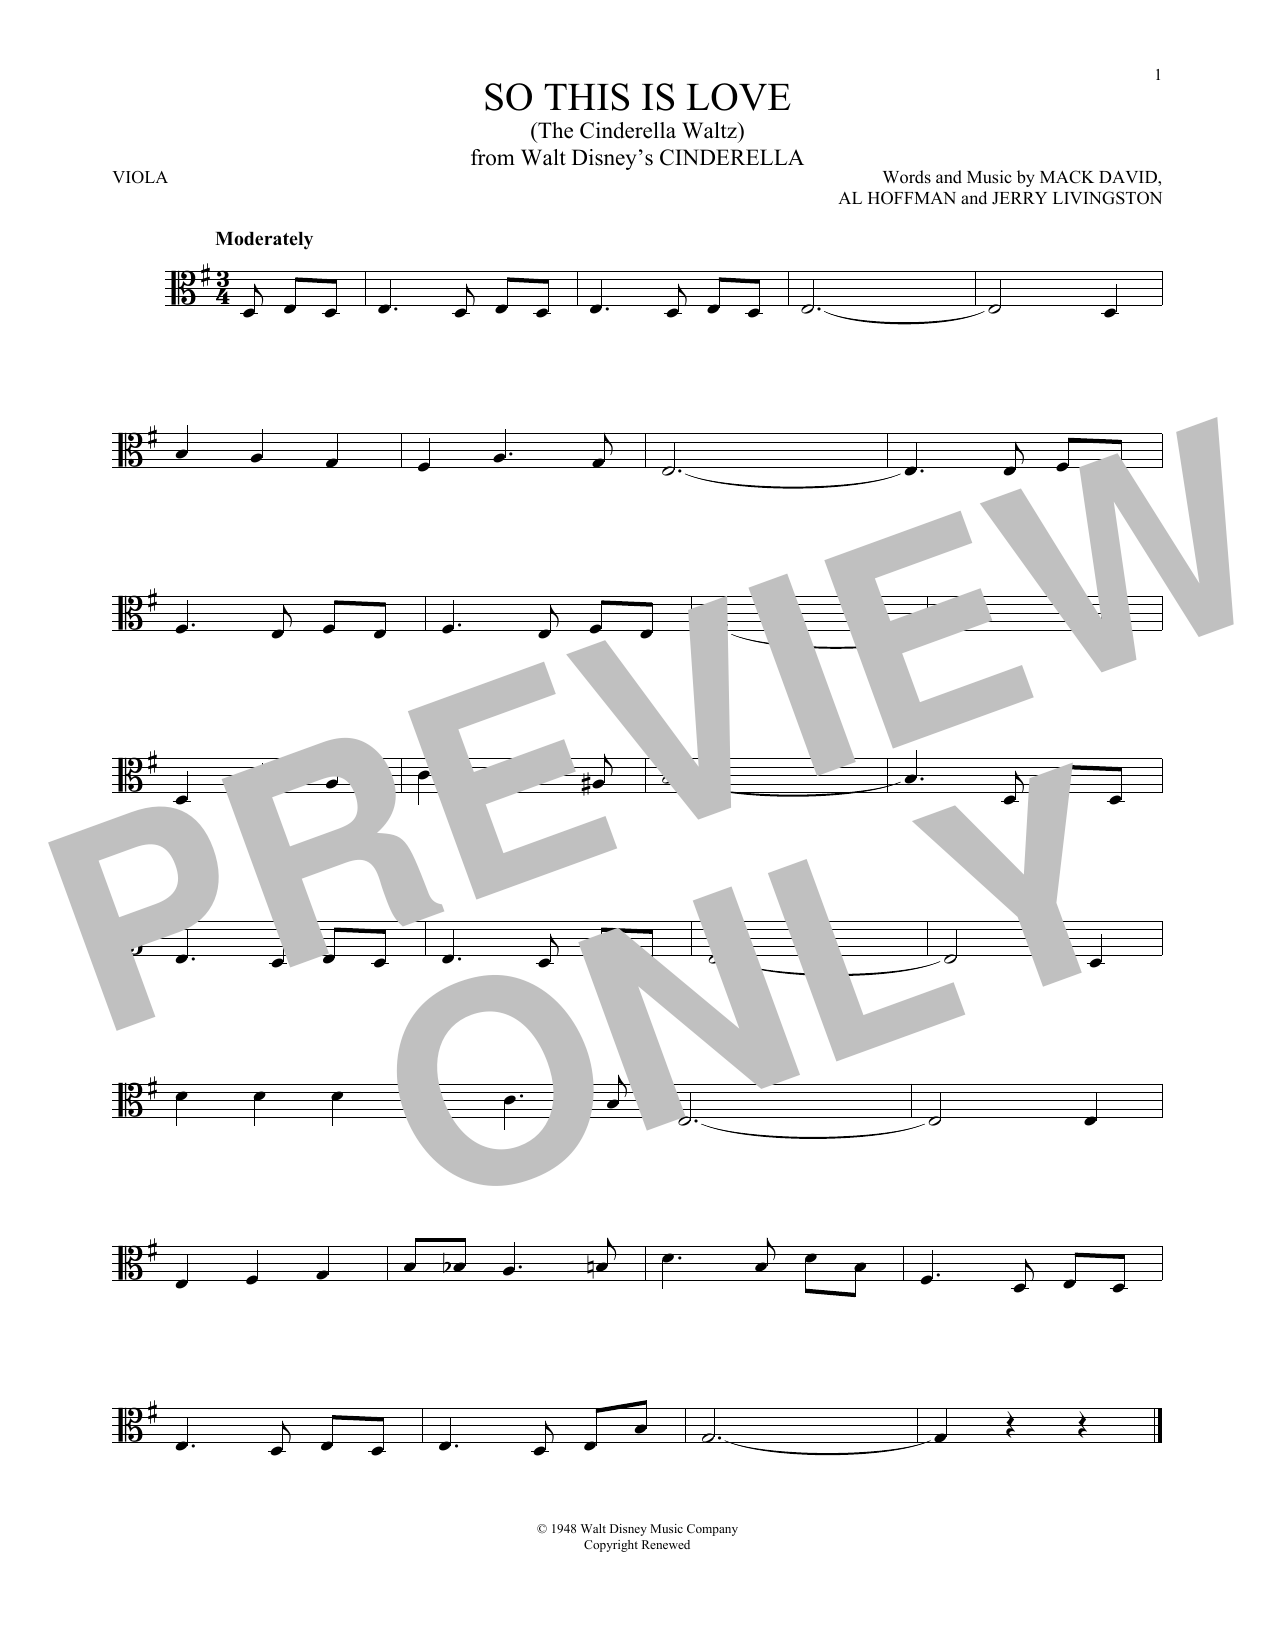 Download Mack David, Al Hoffman and Jerry Liv So This Is Love Sheet Music